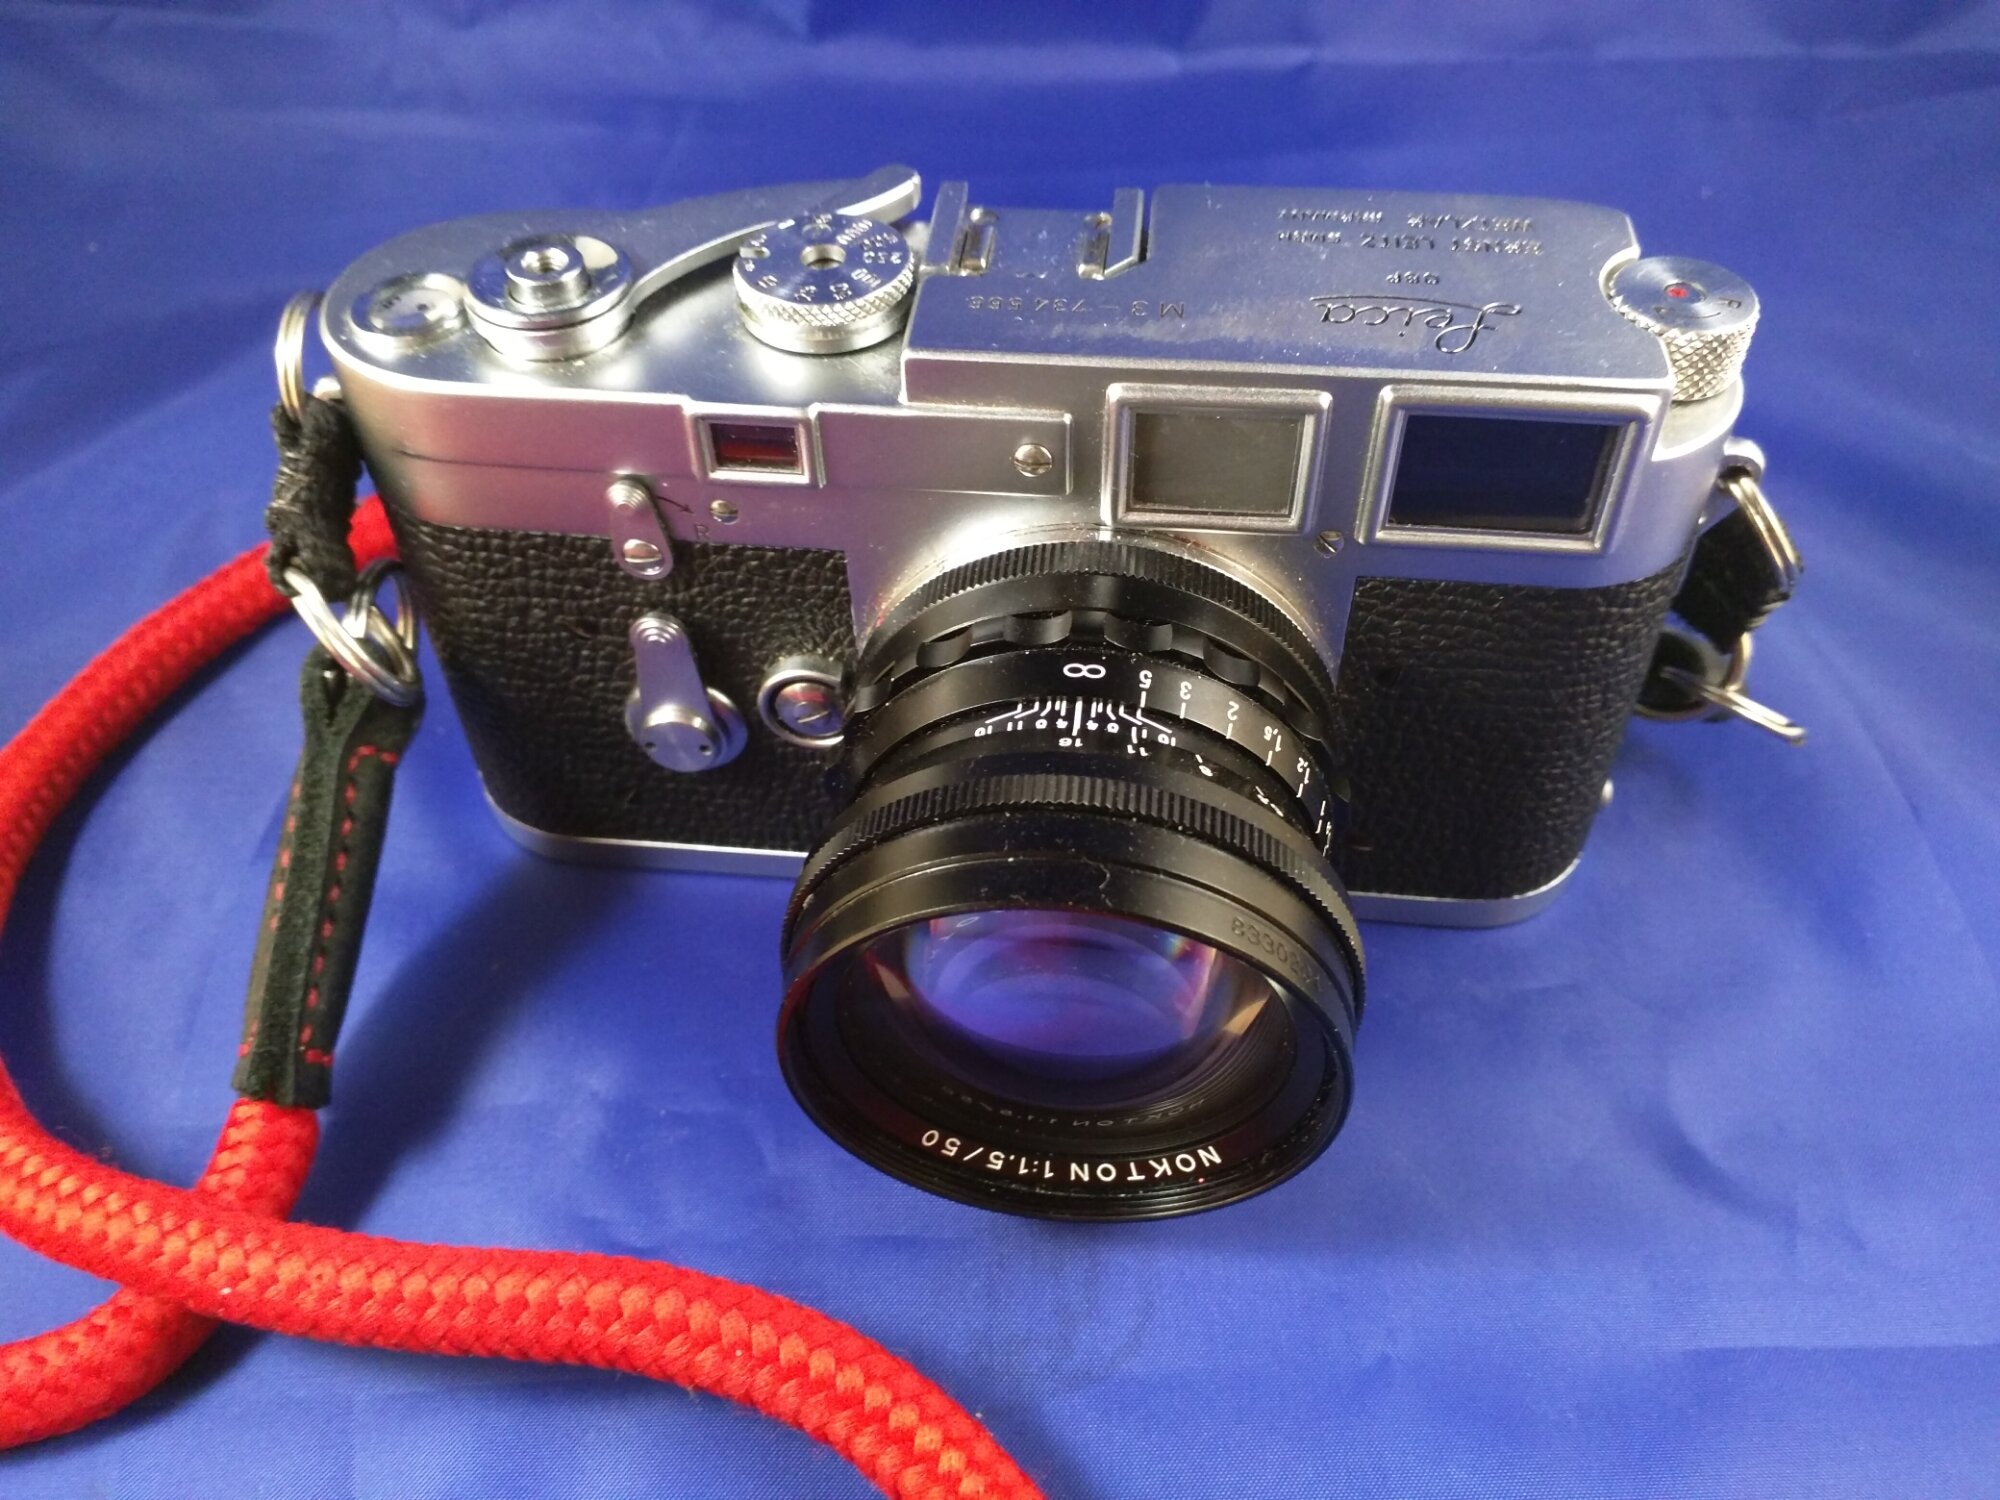 Leica M3, Voigtlander Nokton 50mm f/1.5 ... no, you can't get this camera for $50.